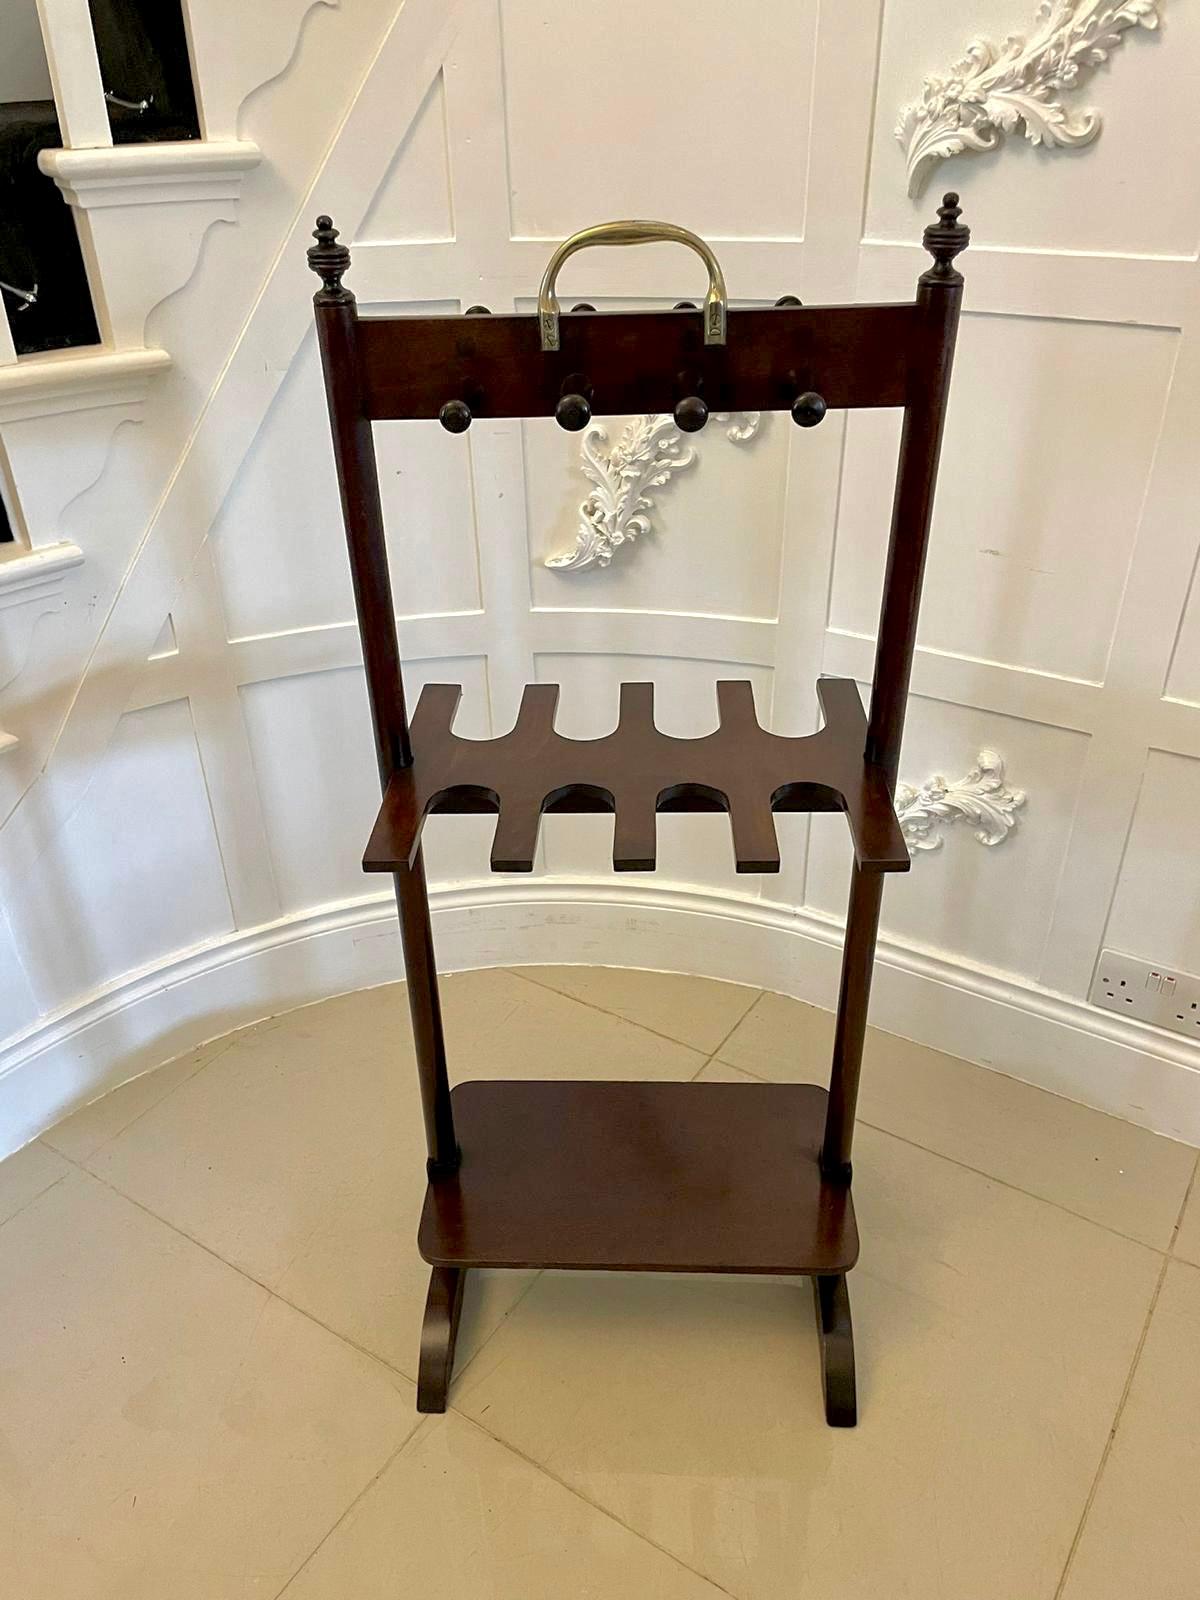 Antique George III quality mahogany boot rack having the original brass carrying handle and turned mahogany pegs, double sided boot stand supported by turned mahogany columns standing on shaped feet united by a shaped mahogany undertier. 

A